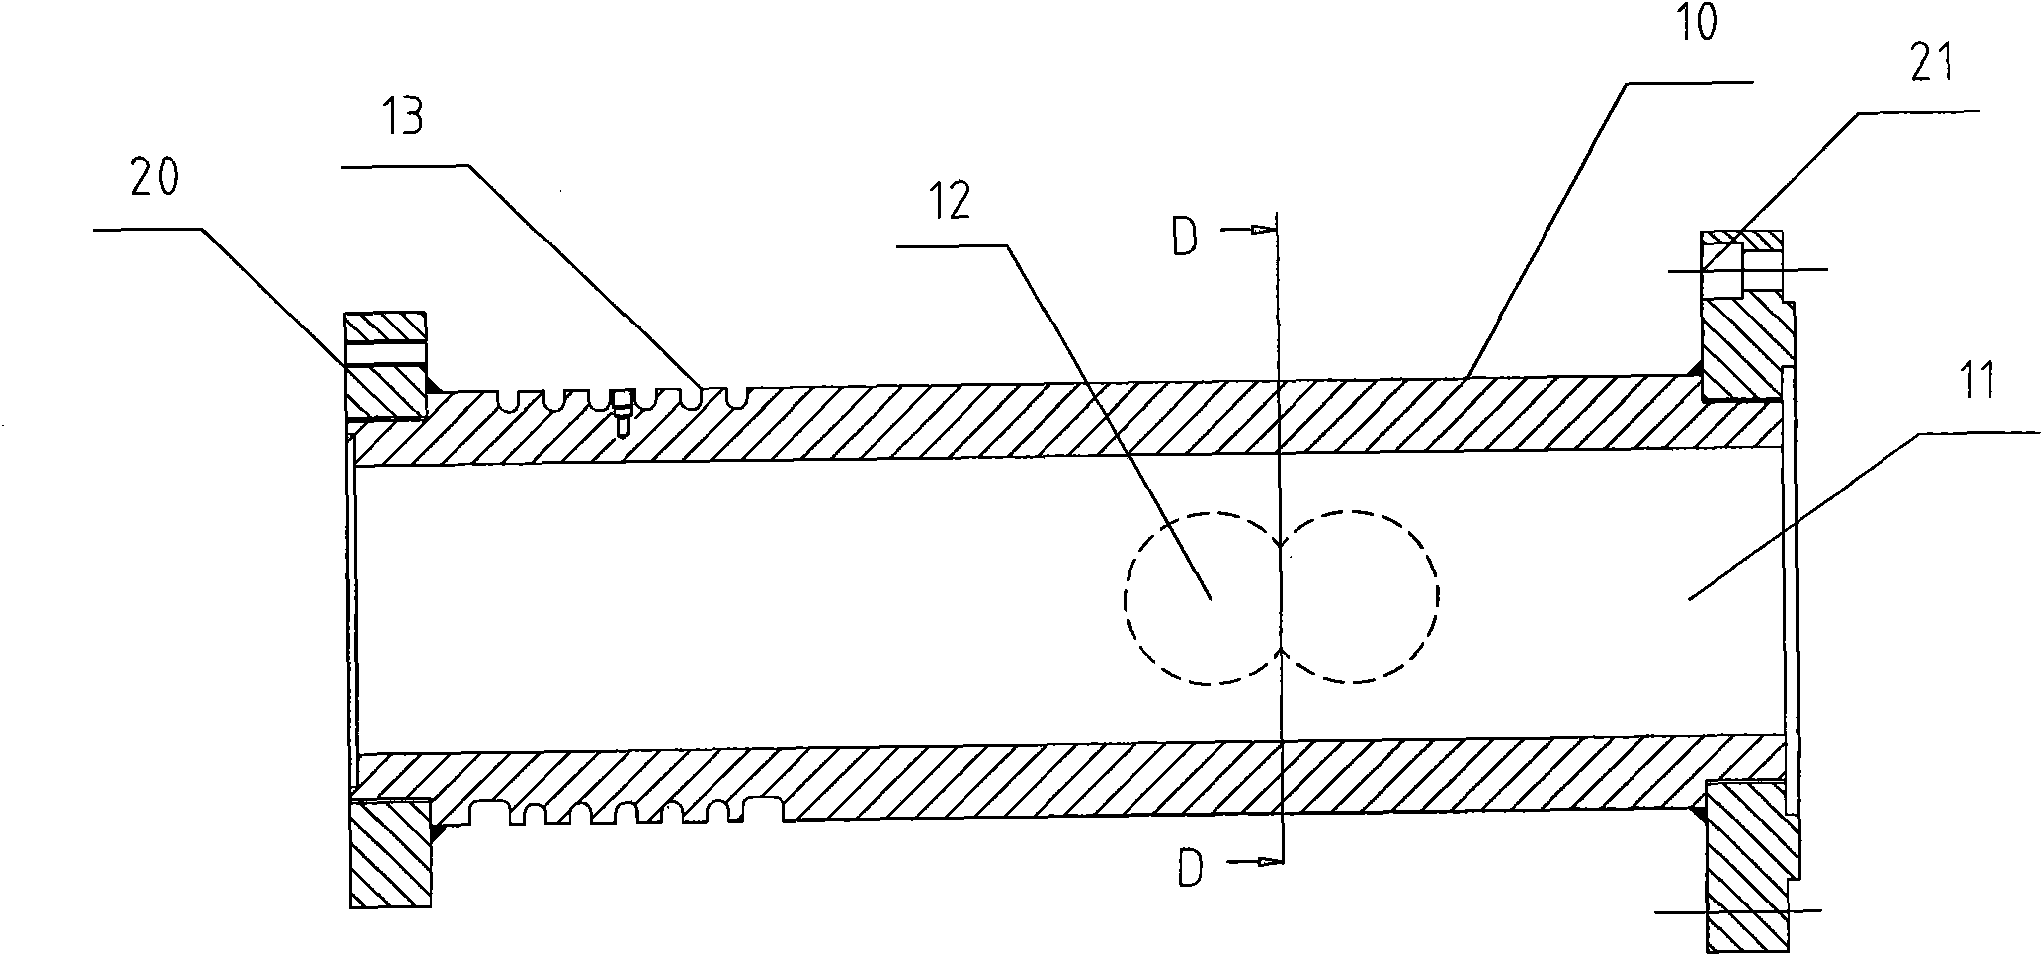 Feeding cylinder with single screw and double cones